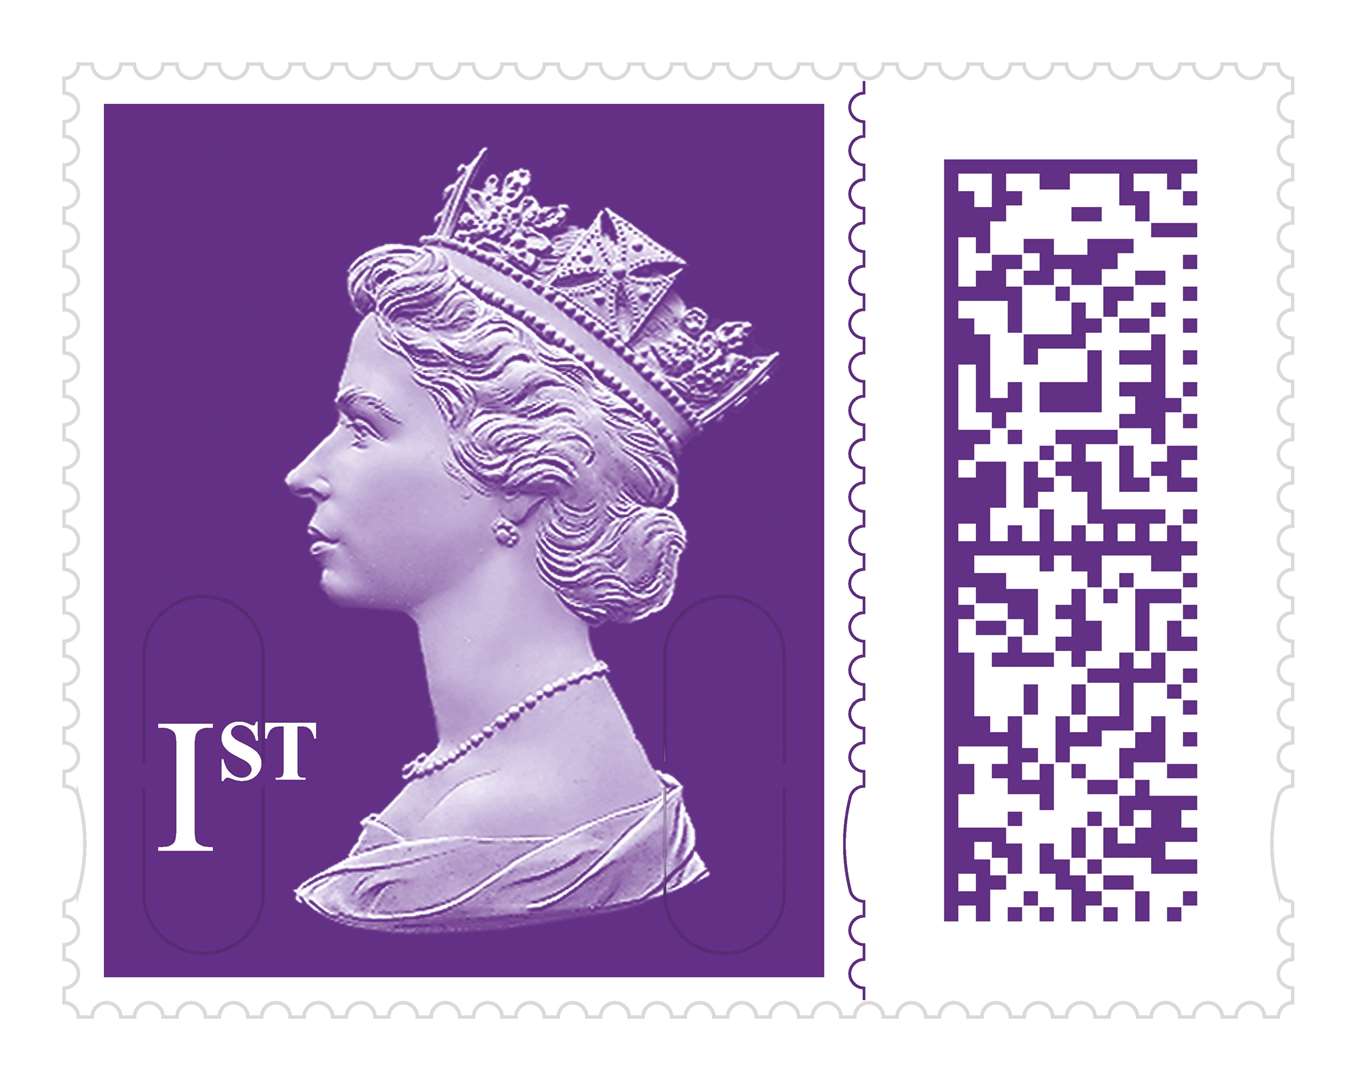 Only stamps with a barcode can be used after January 31